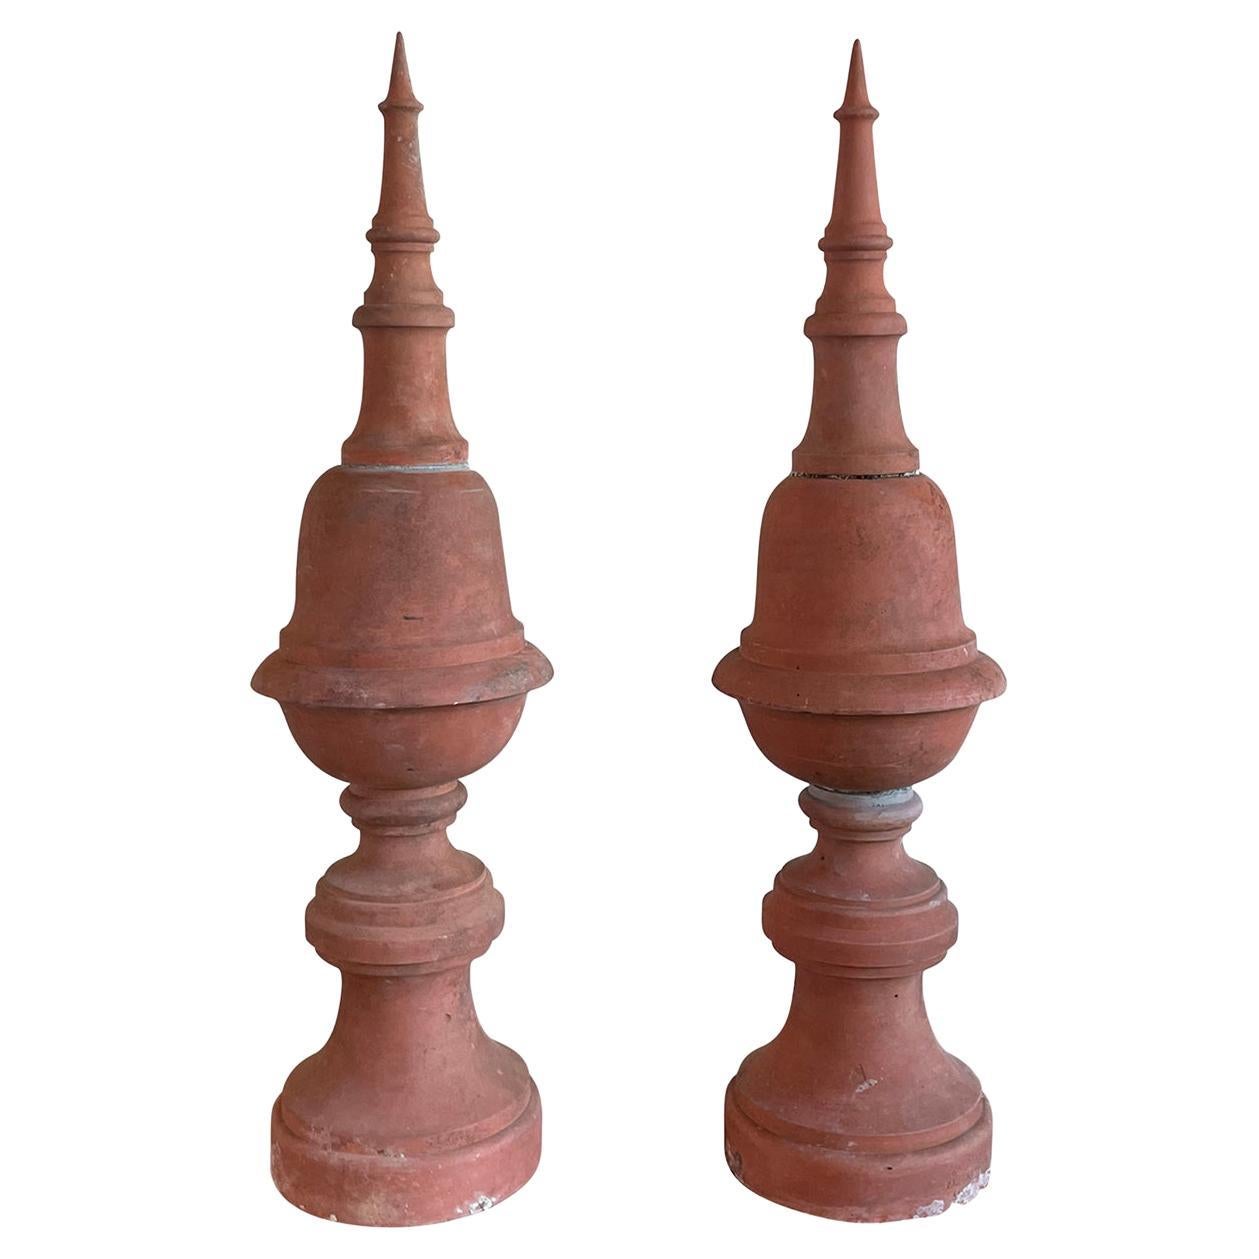 17th Century French Pair of Terra Cotta Finials - Antique Garden Ornaments For Sale